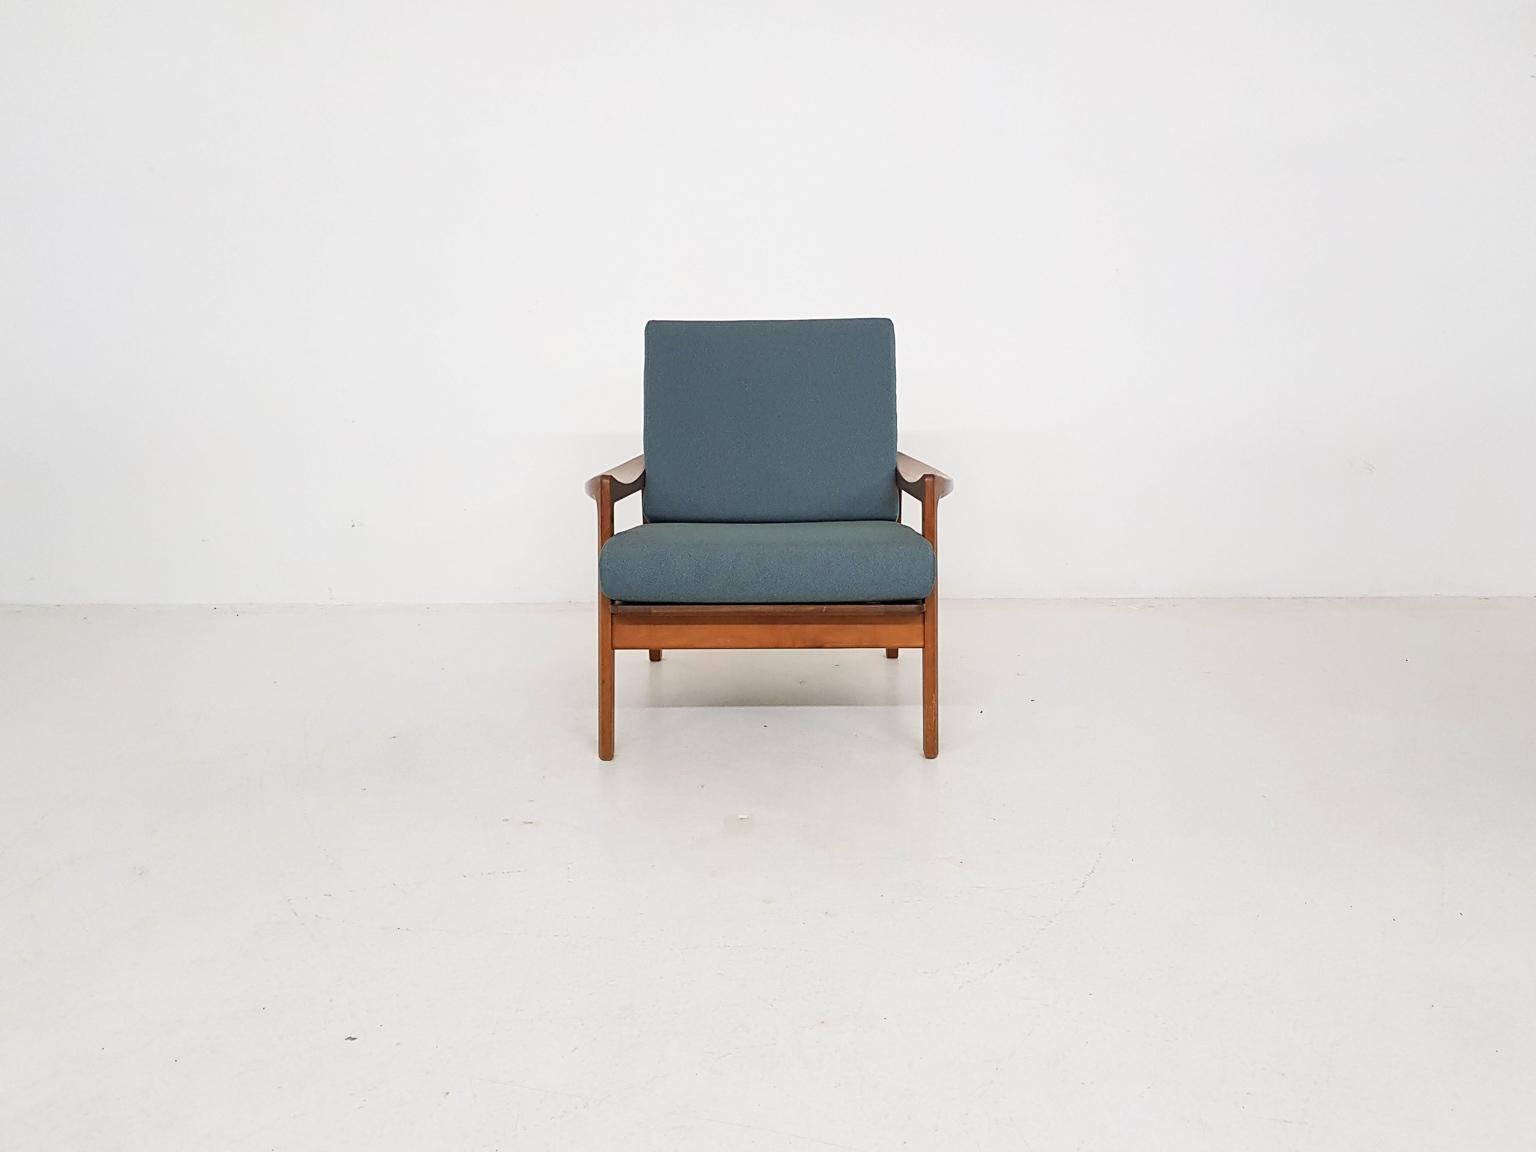 Scandinavian modern lounge chair, Denmark made in the 1960s

It has a teak frame with new cushions and new green upholstery.

Nice lounge chair with a nice organic shape and beautiful midcentury Danish or Scandinavian design by Tove and edvard